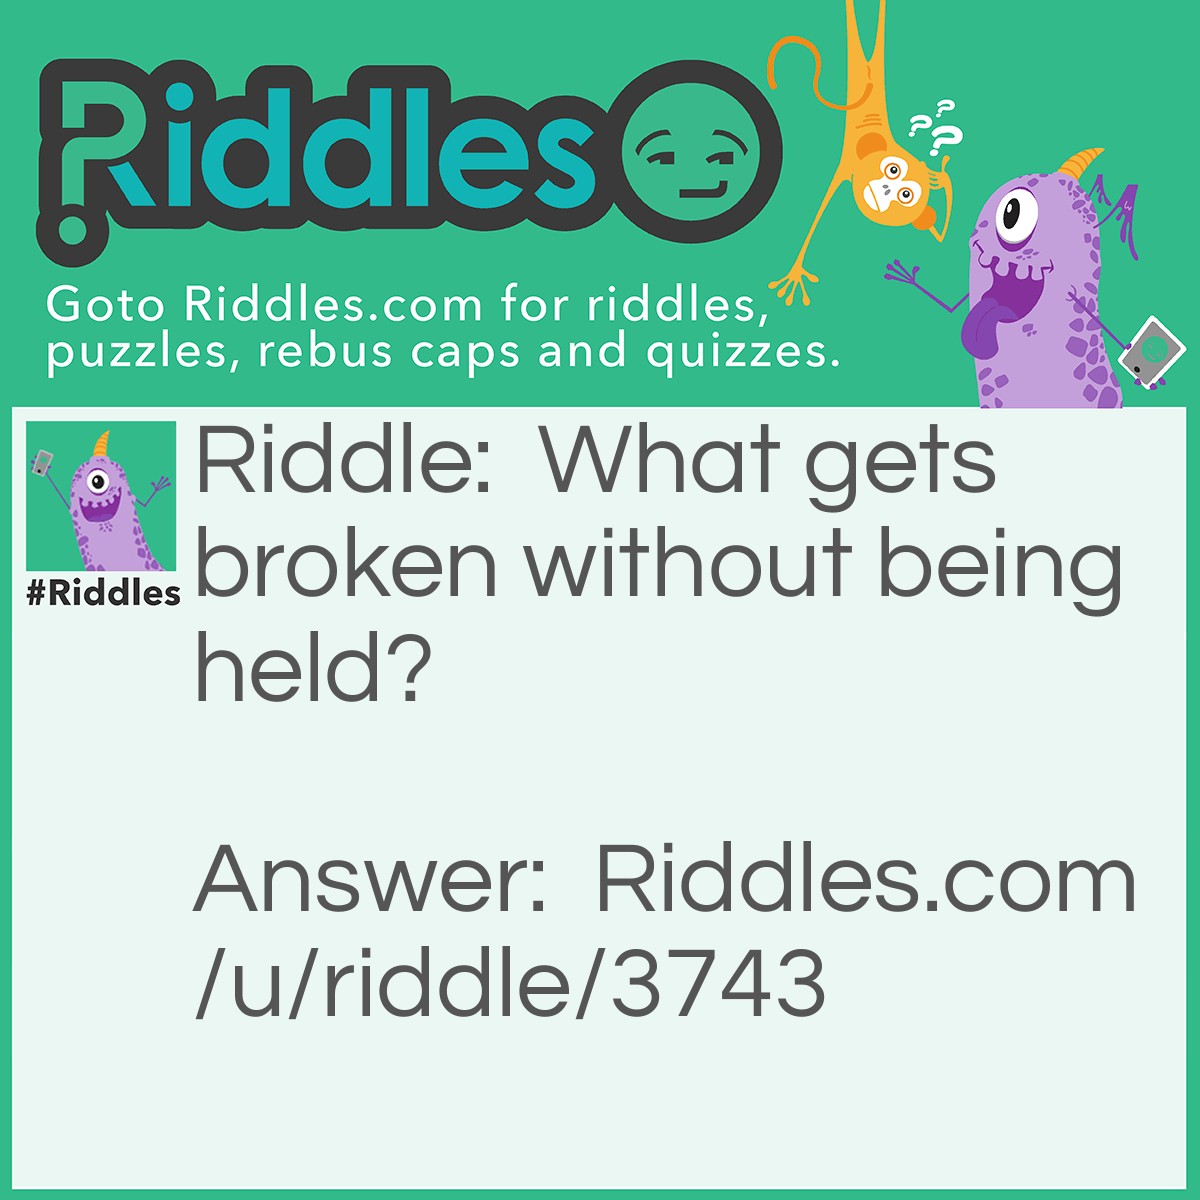 Riddle: What gets broken without being held? Answer: A promise.